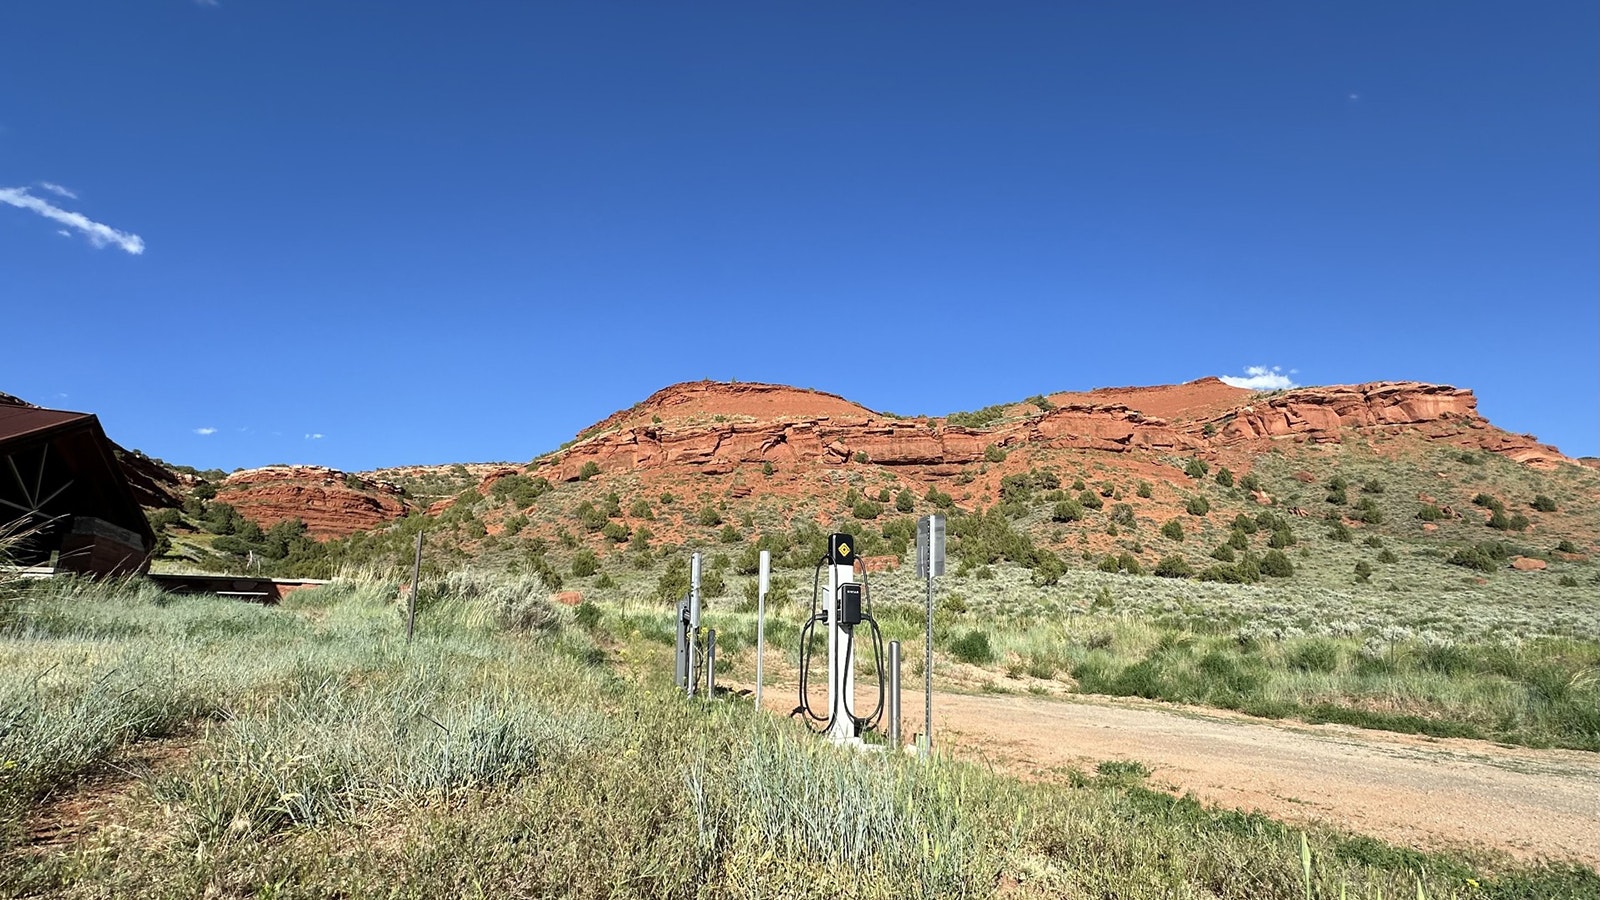 This solar-powered EV charging station on the 5,000-acre Red Canyon Ranch in the middle of nowhere near Lander, Wyoming, was put there as part of a test to see how EVs perform in the brutal Wyoming weather and rugged terrain.